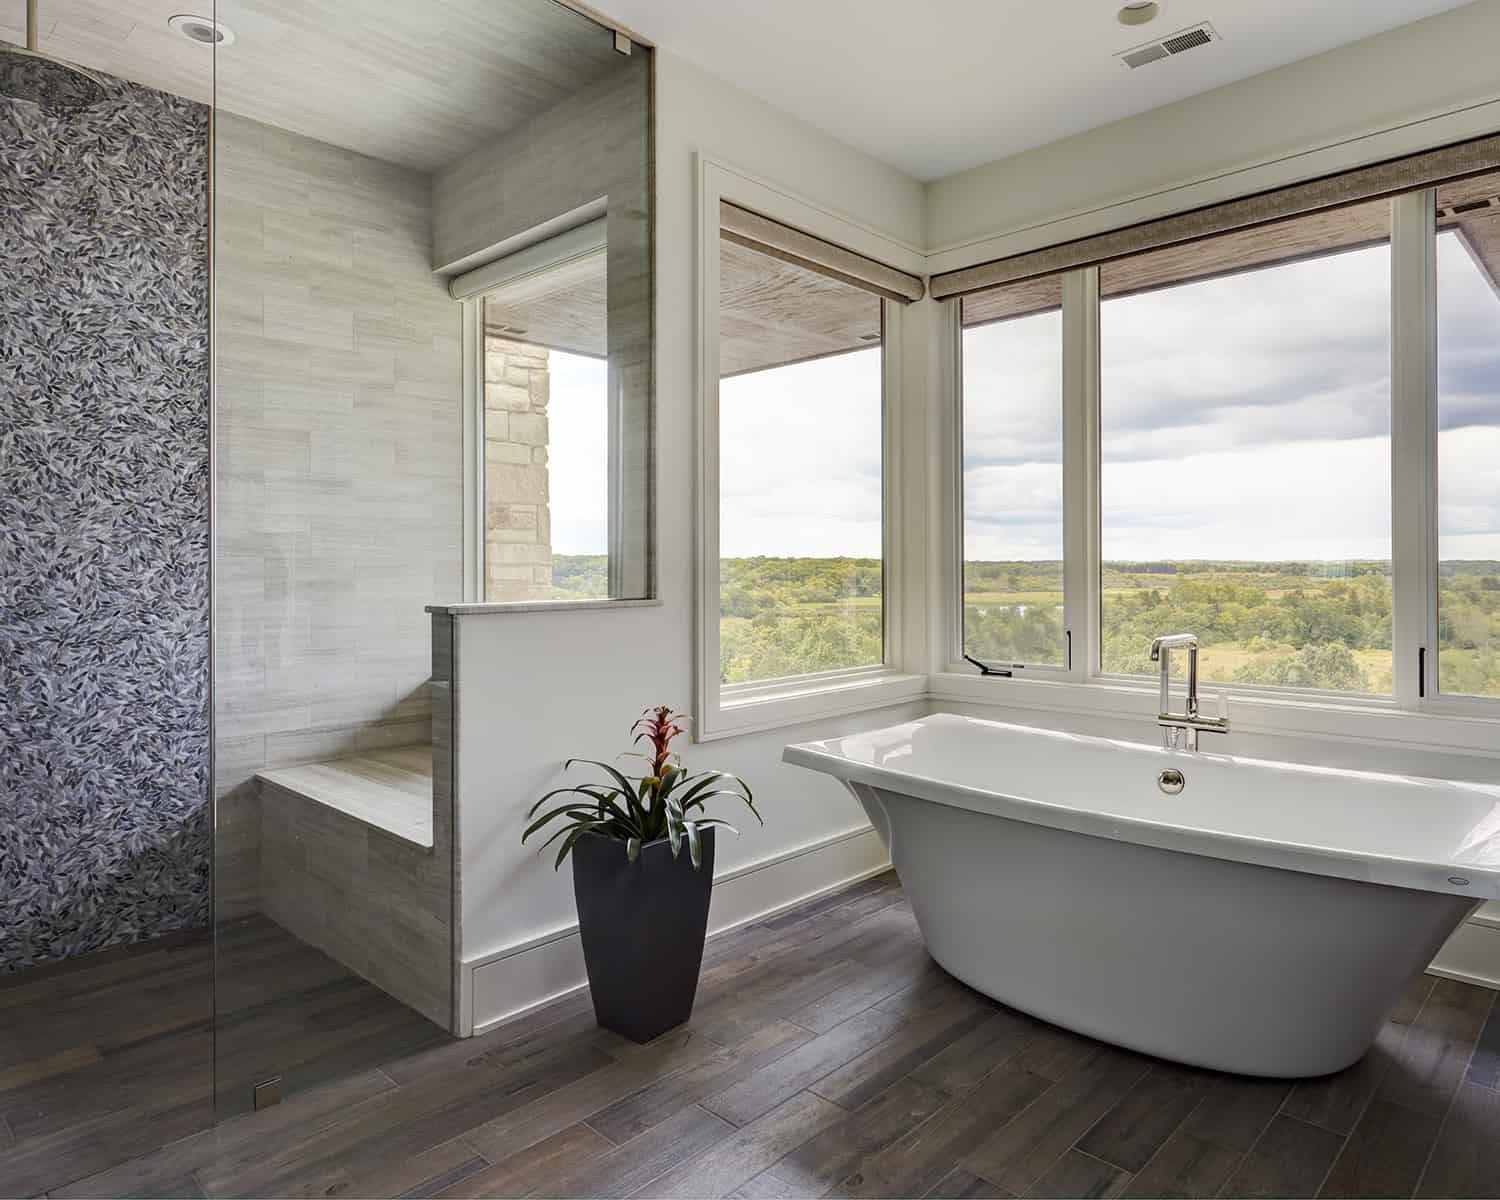 freestanding tub in front of windows